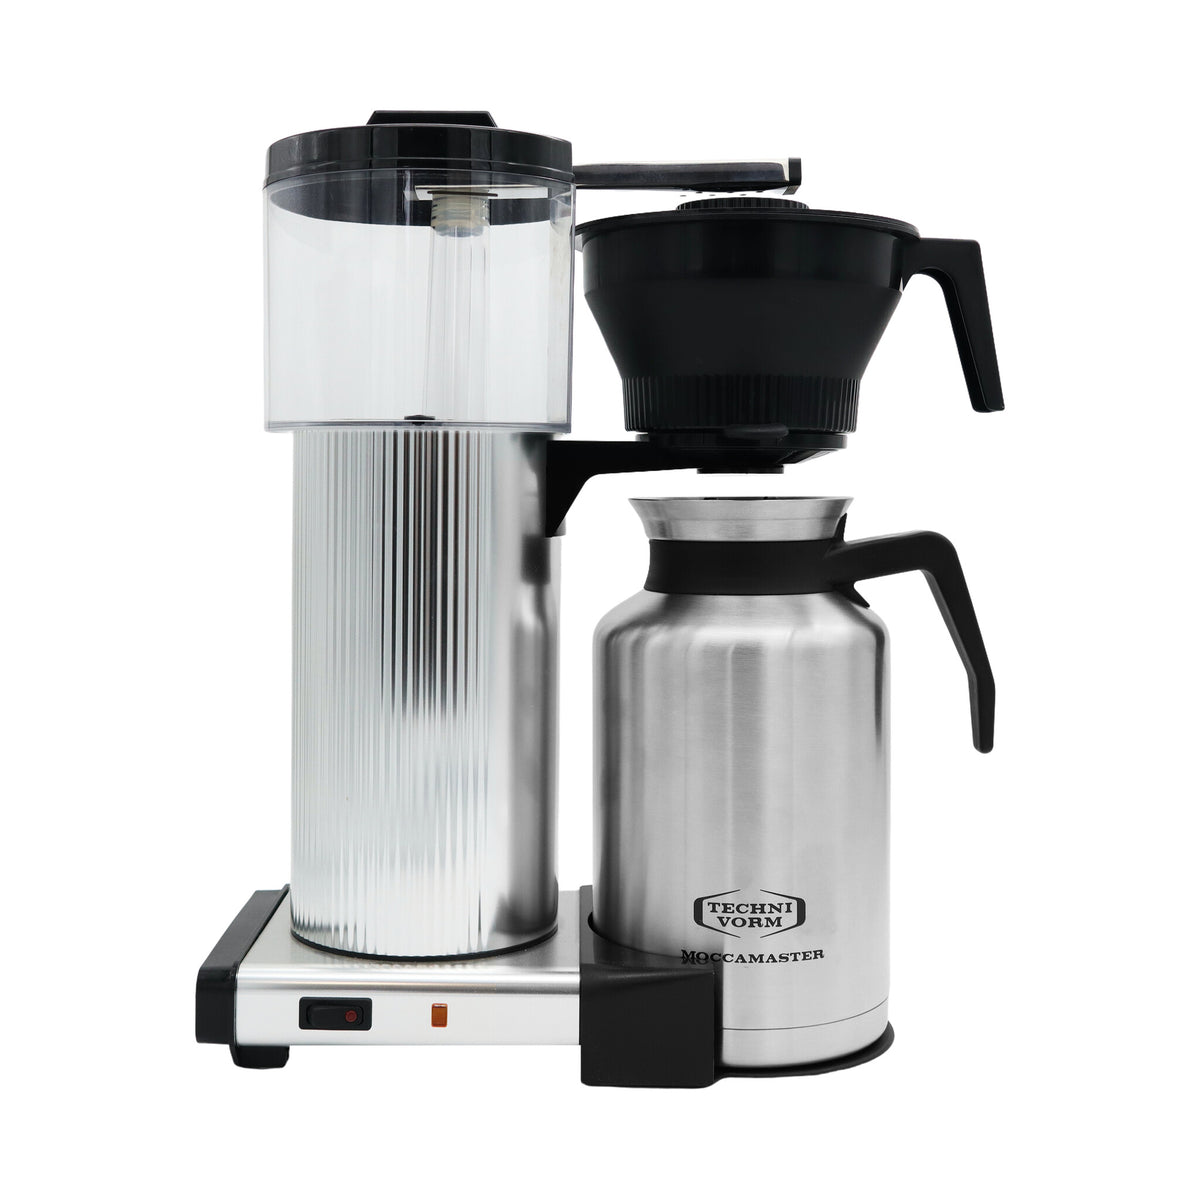 Moccamaster CDT Grand - 1.8 Litre Fully-auto Drip coffee maker in Black / Metallic